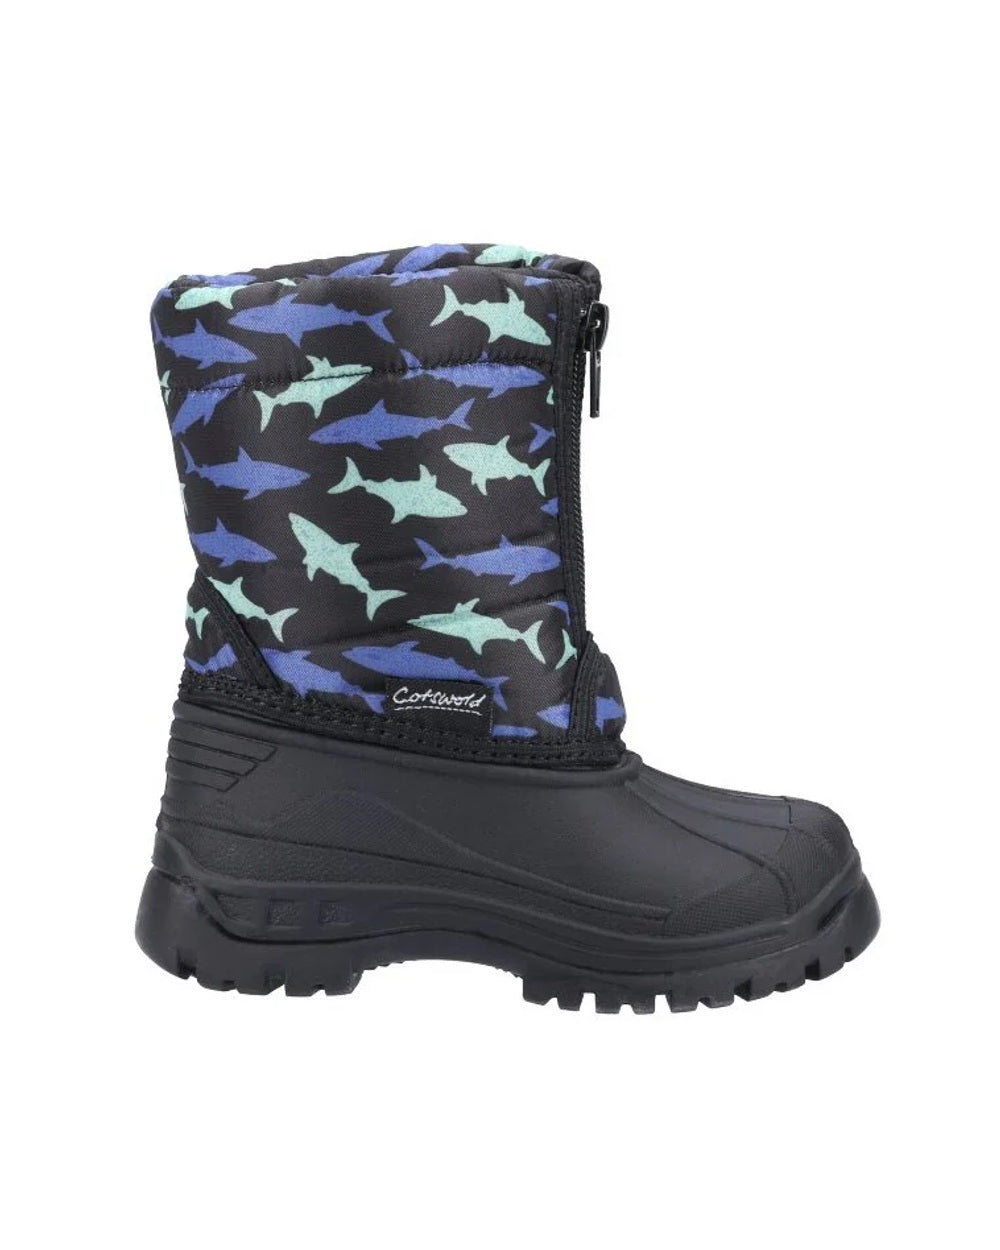 Shark coloured Cotswold Kids Iceberg Zip Snow Boots on white background 